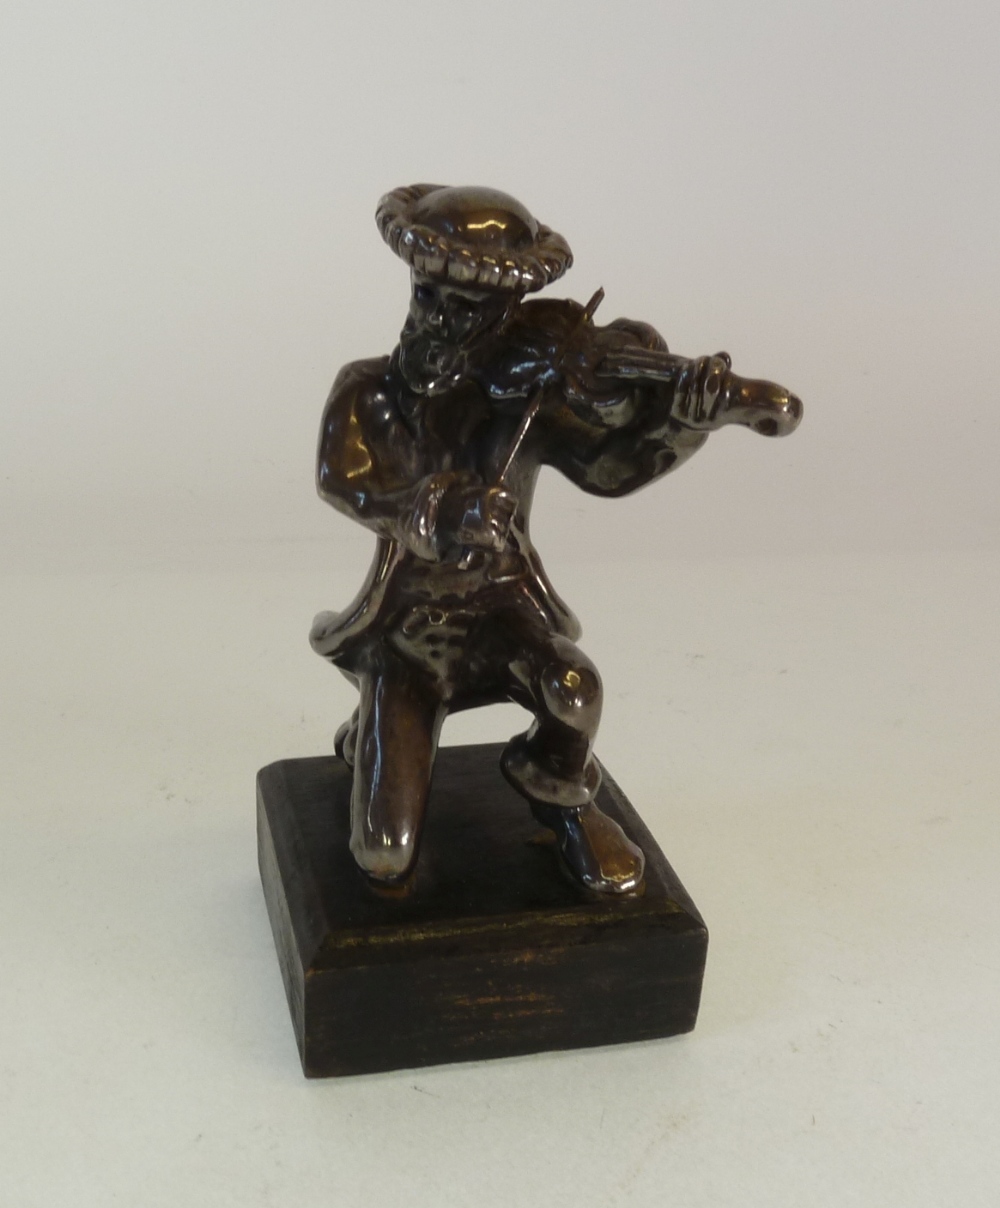 A STAMPED 925 WEIGHTED MODEL OF A JEWISH FIDDLER, on wooden base, 4" (10.2cm) high